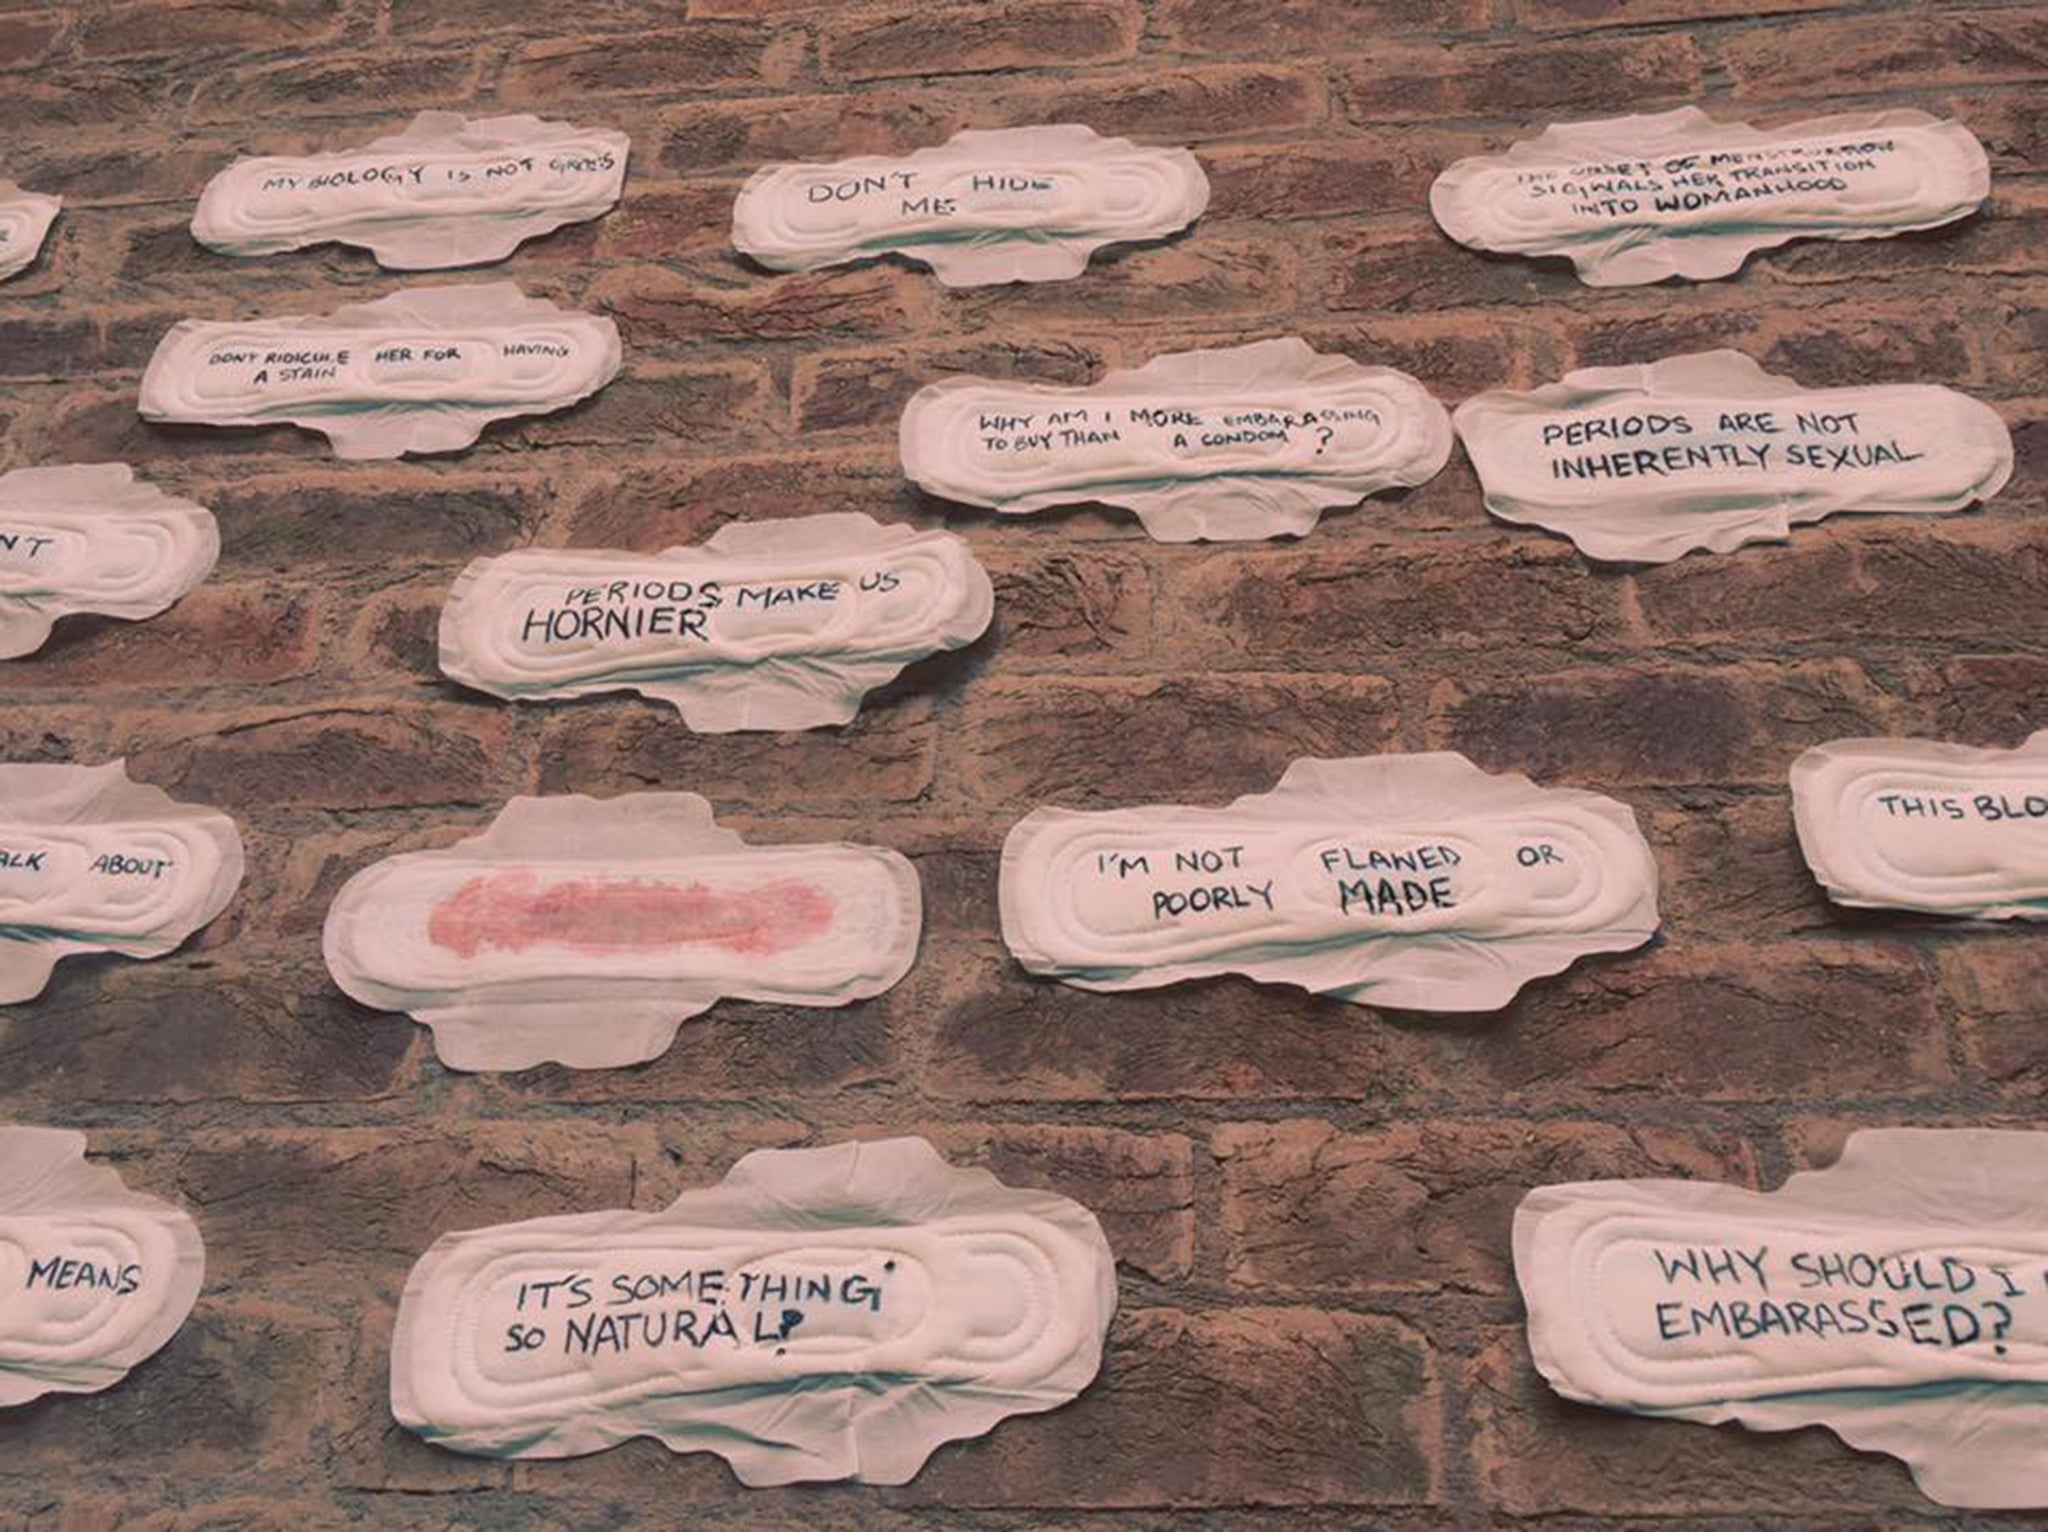 These sanitary towels were used to protest the taboo surrounding menstruation in Pakistan